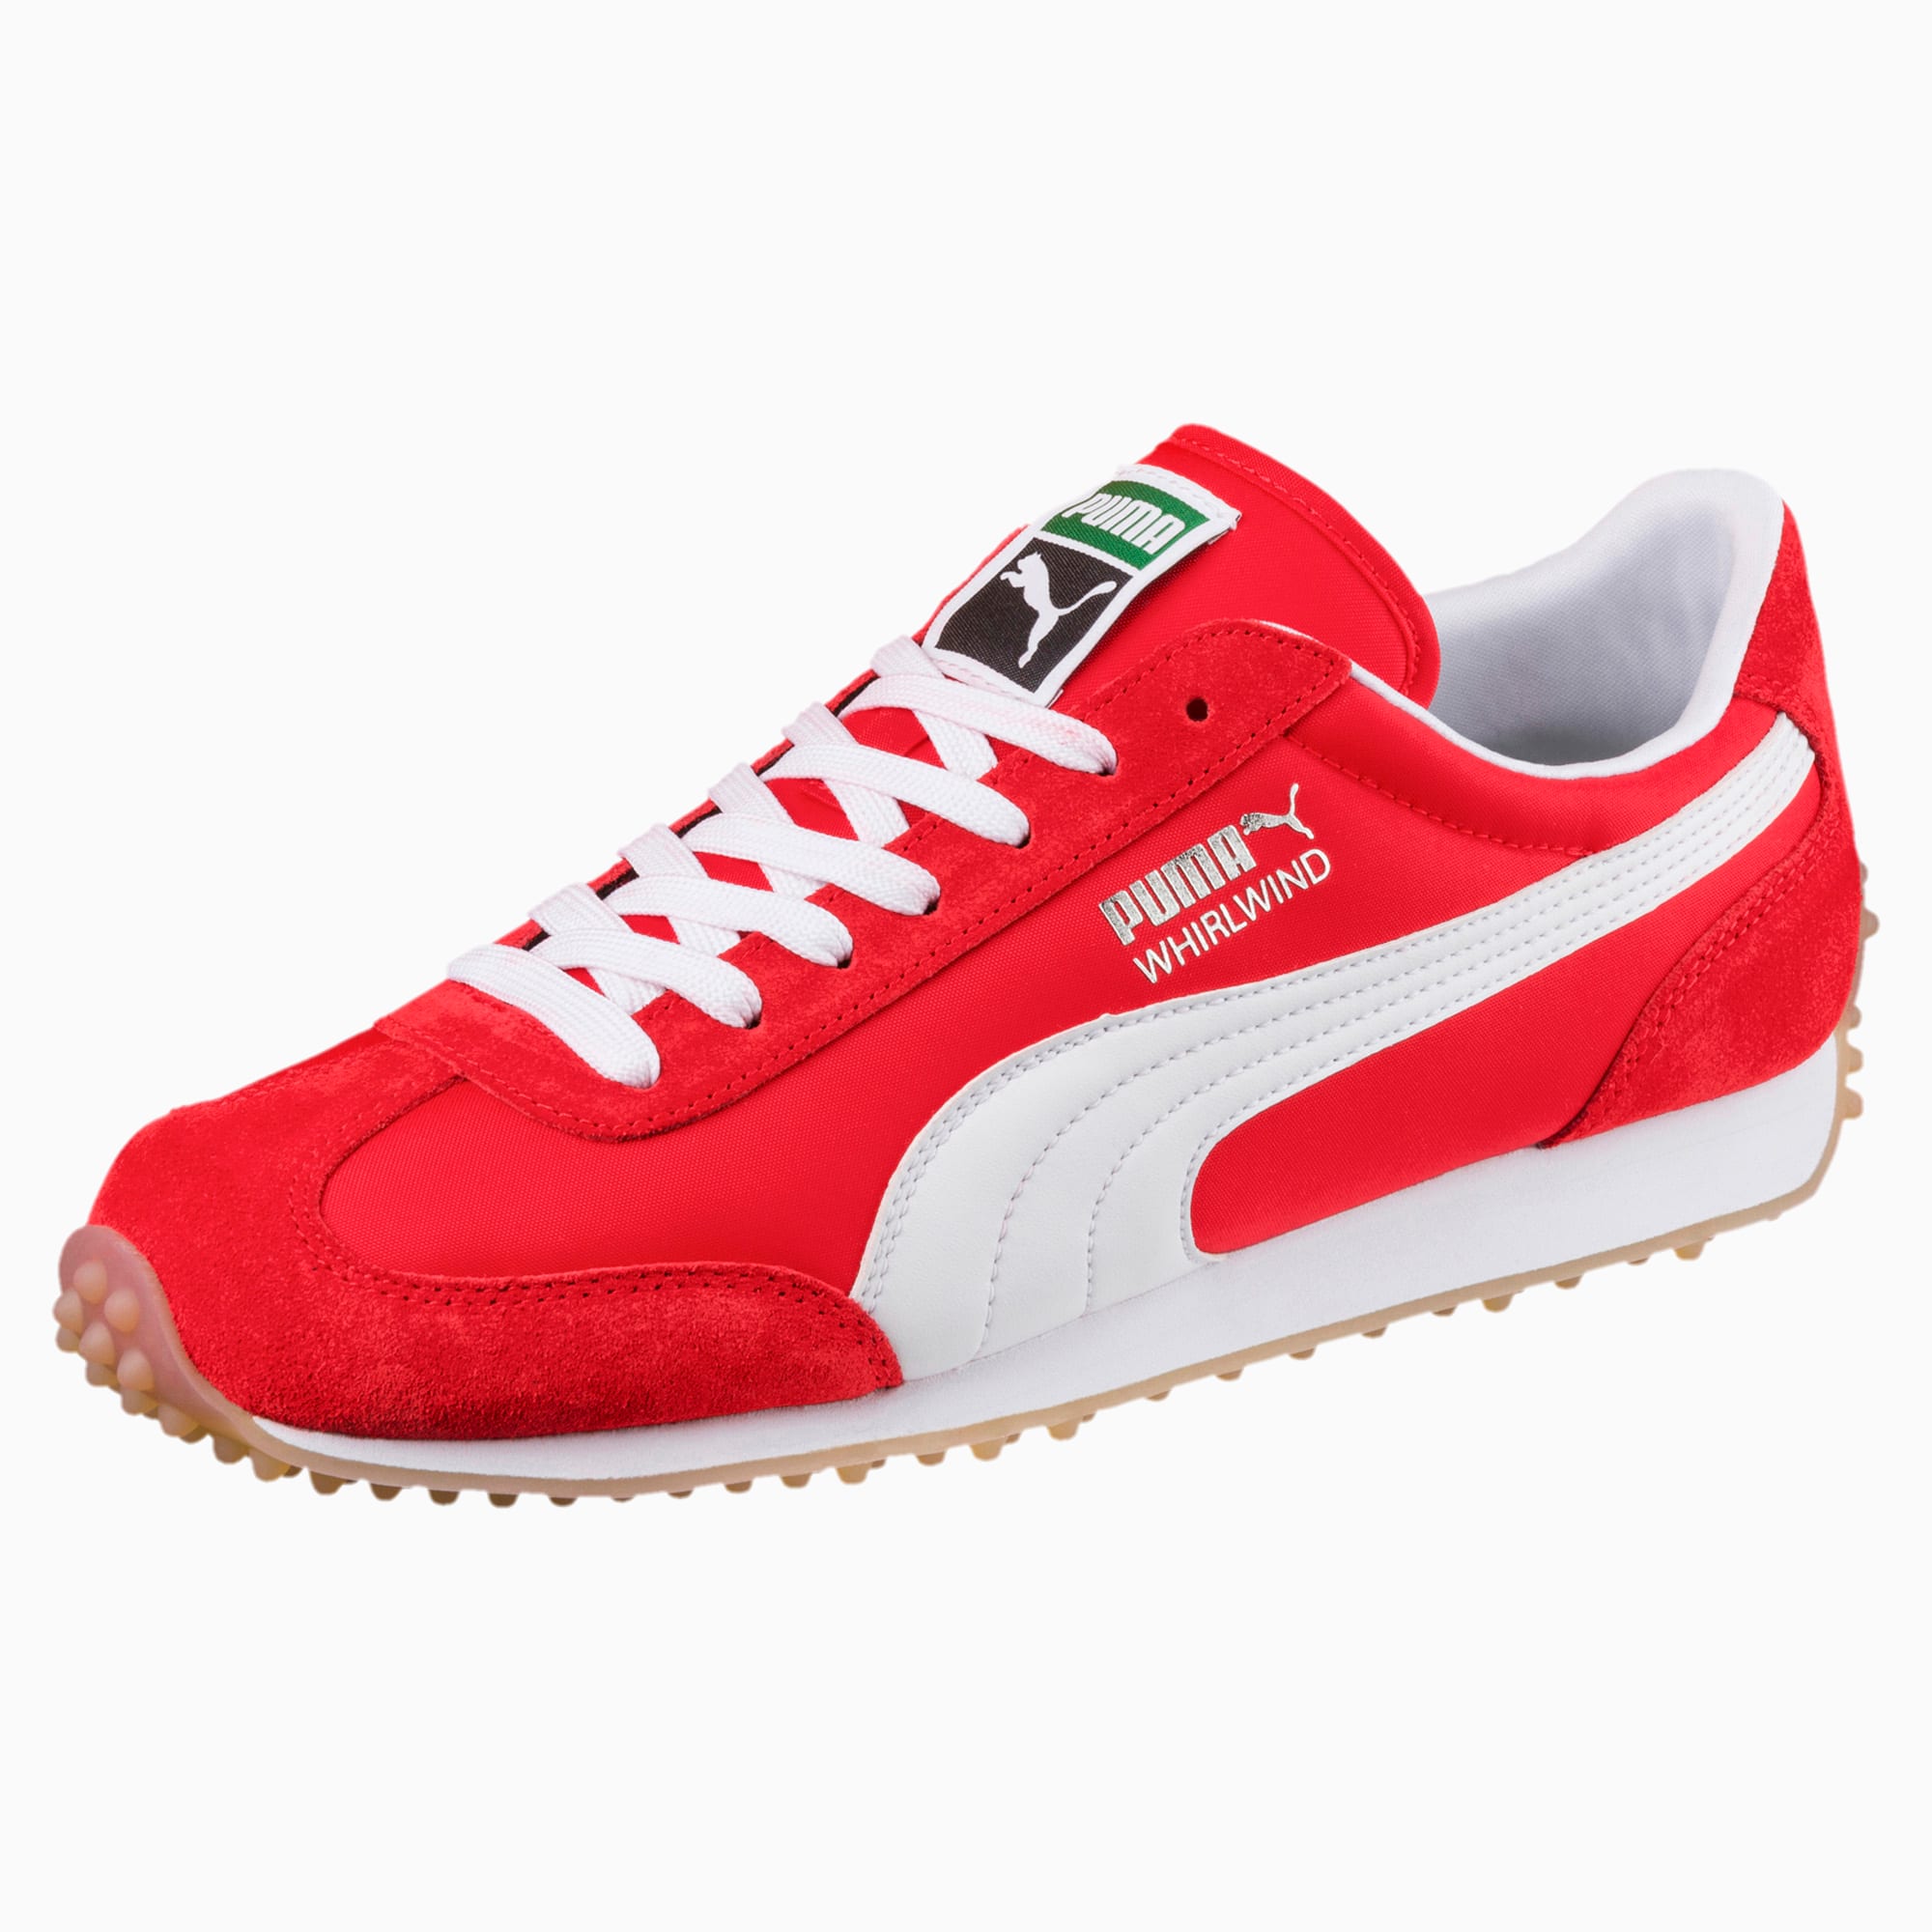 Puma Archive Whirlwind Classic Trainers 